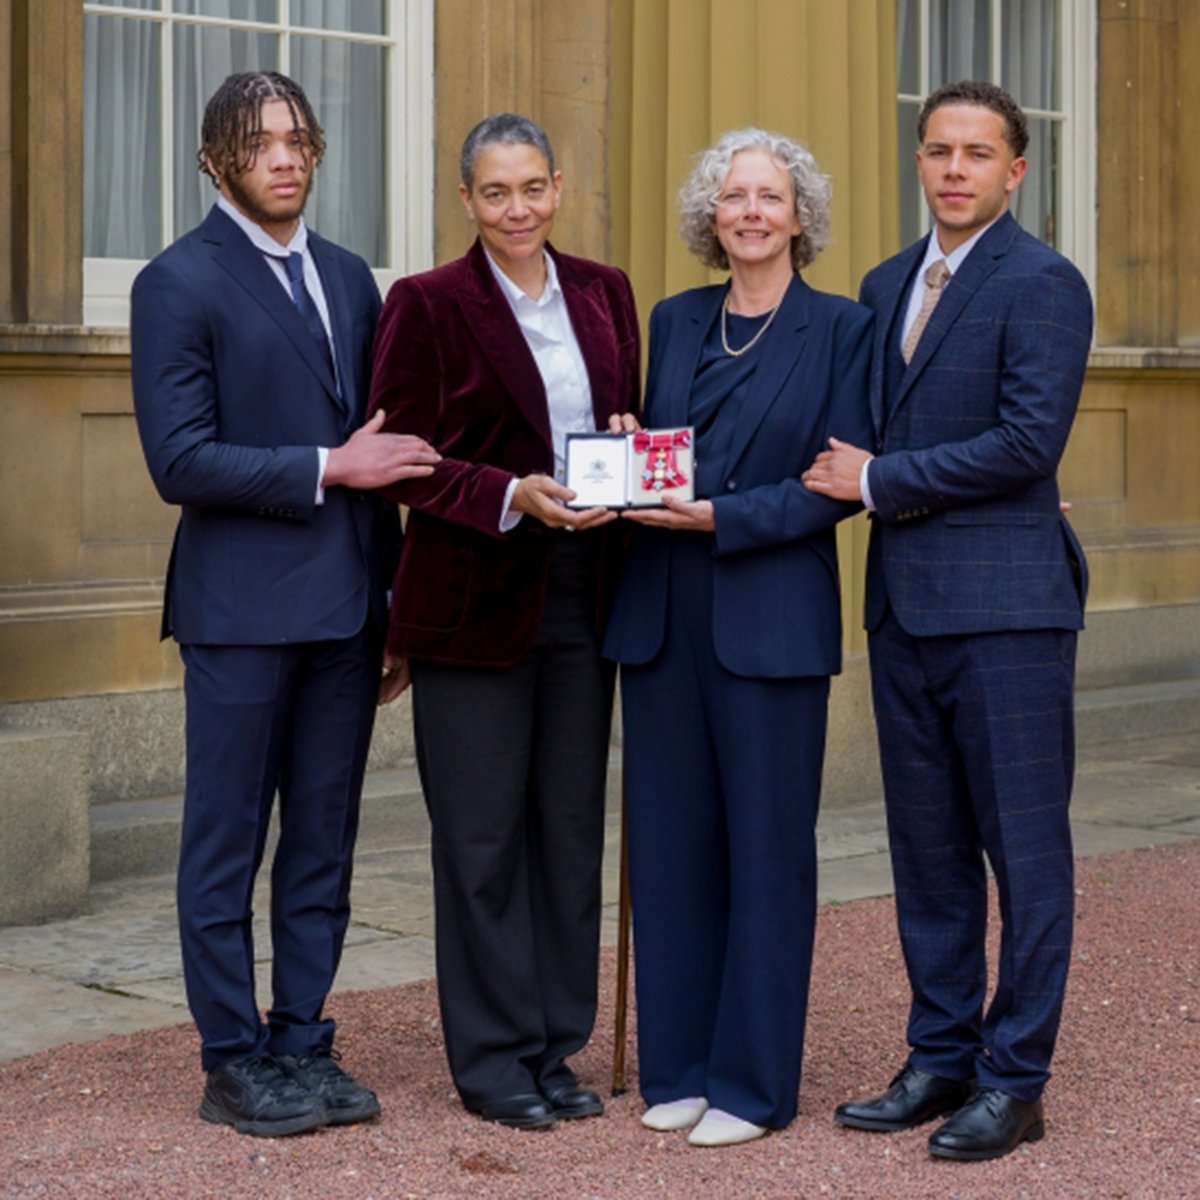 Proud as punch to go to the Palace last week with my co-parent Isabelle Trowler CBE (and our wonderful young men) to pick up her gong 🥇 #Investiture